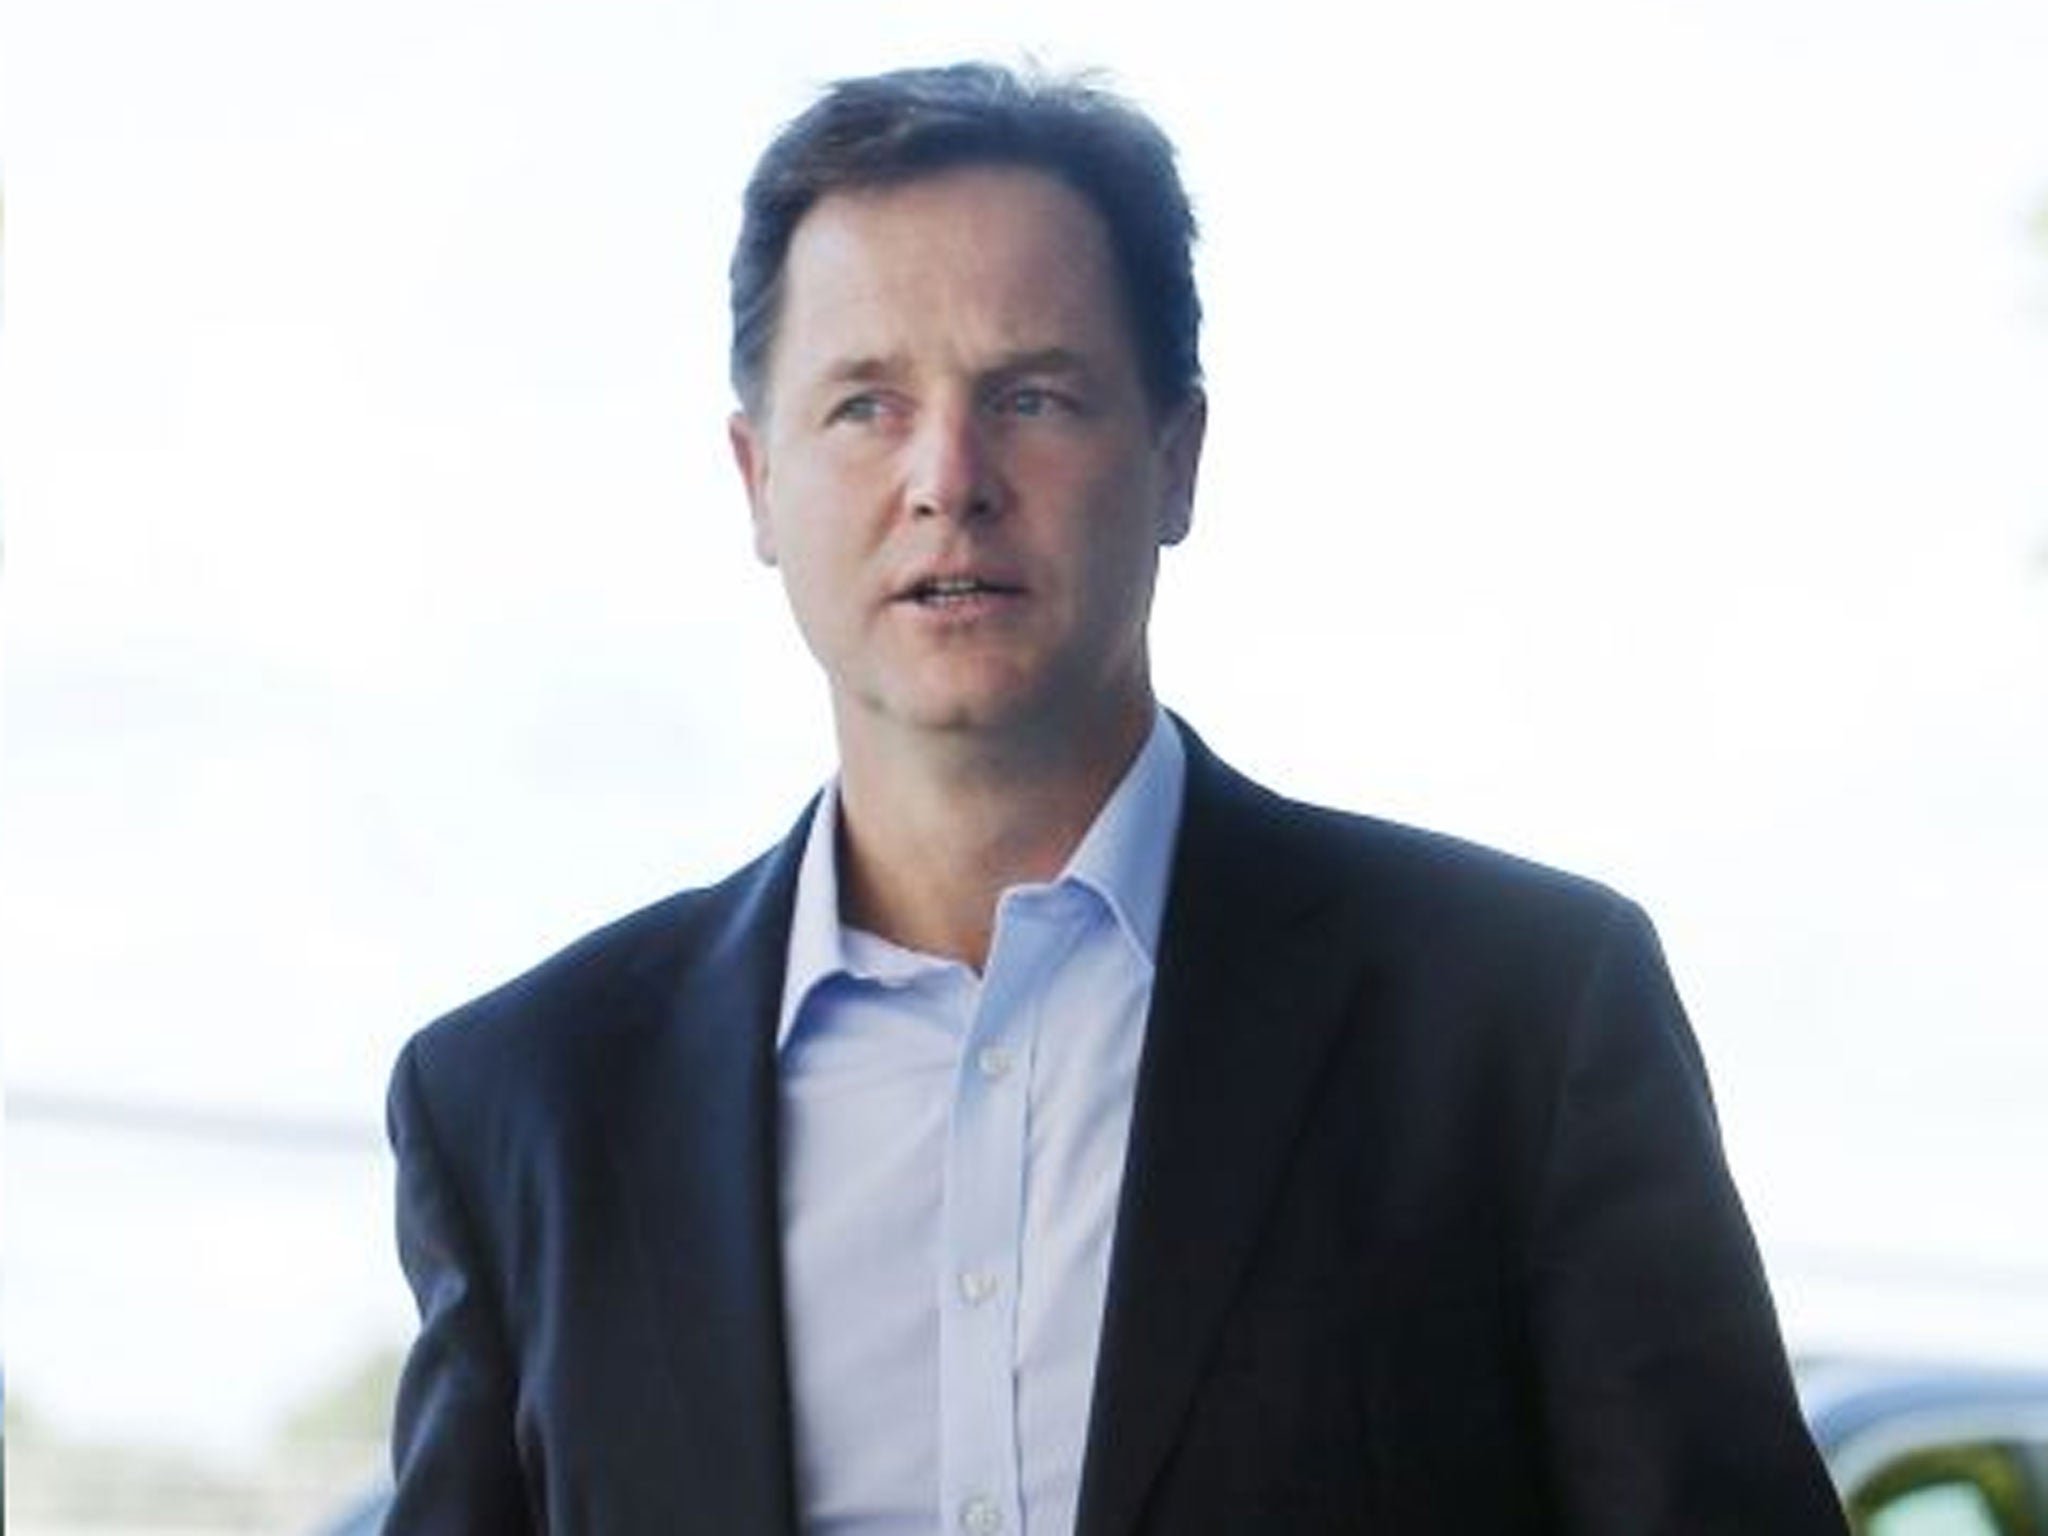 Nick Clegg says Lib Dems will push to raise personal tax-free allowance to £12,500 if re-elected Labour